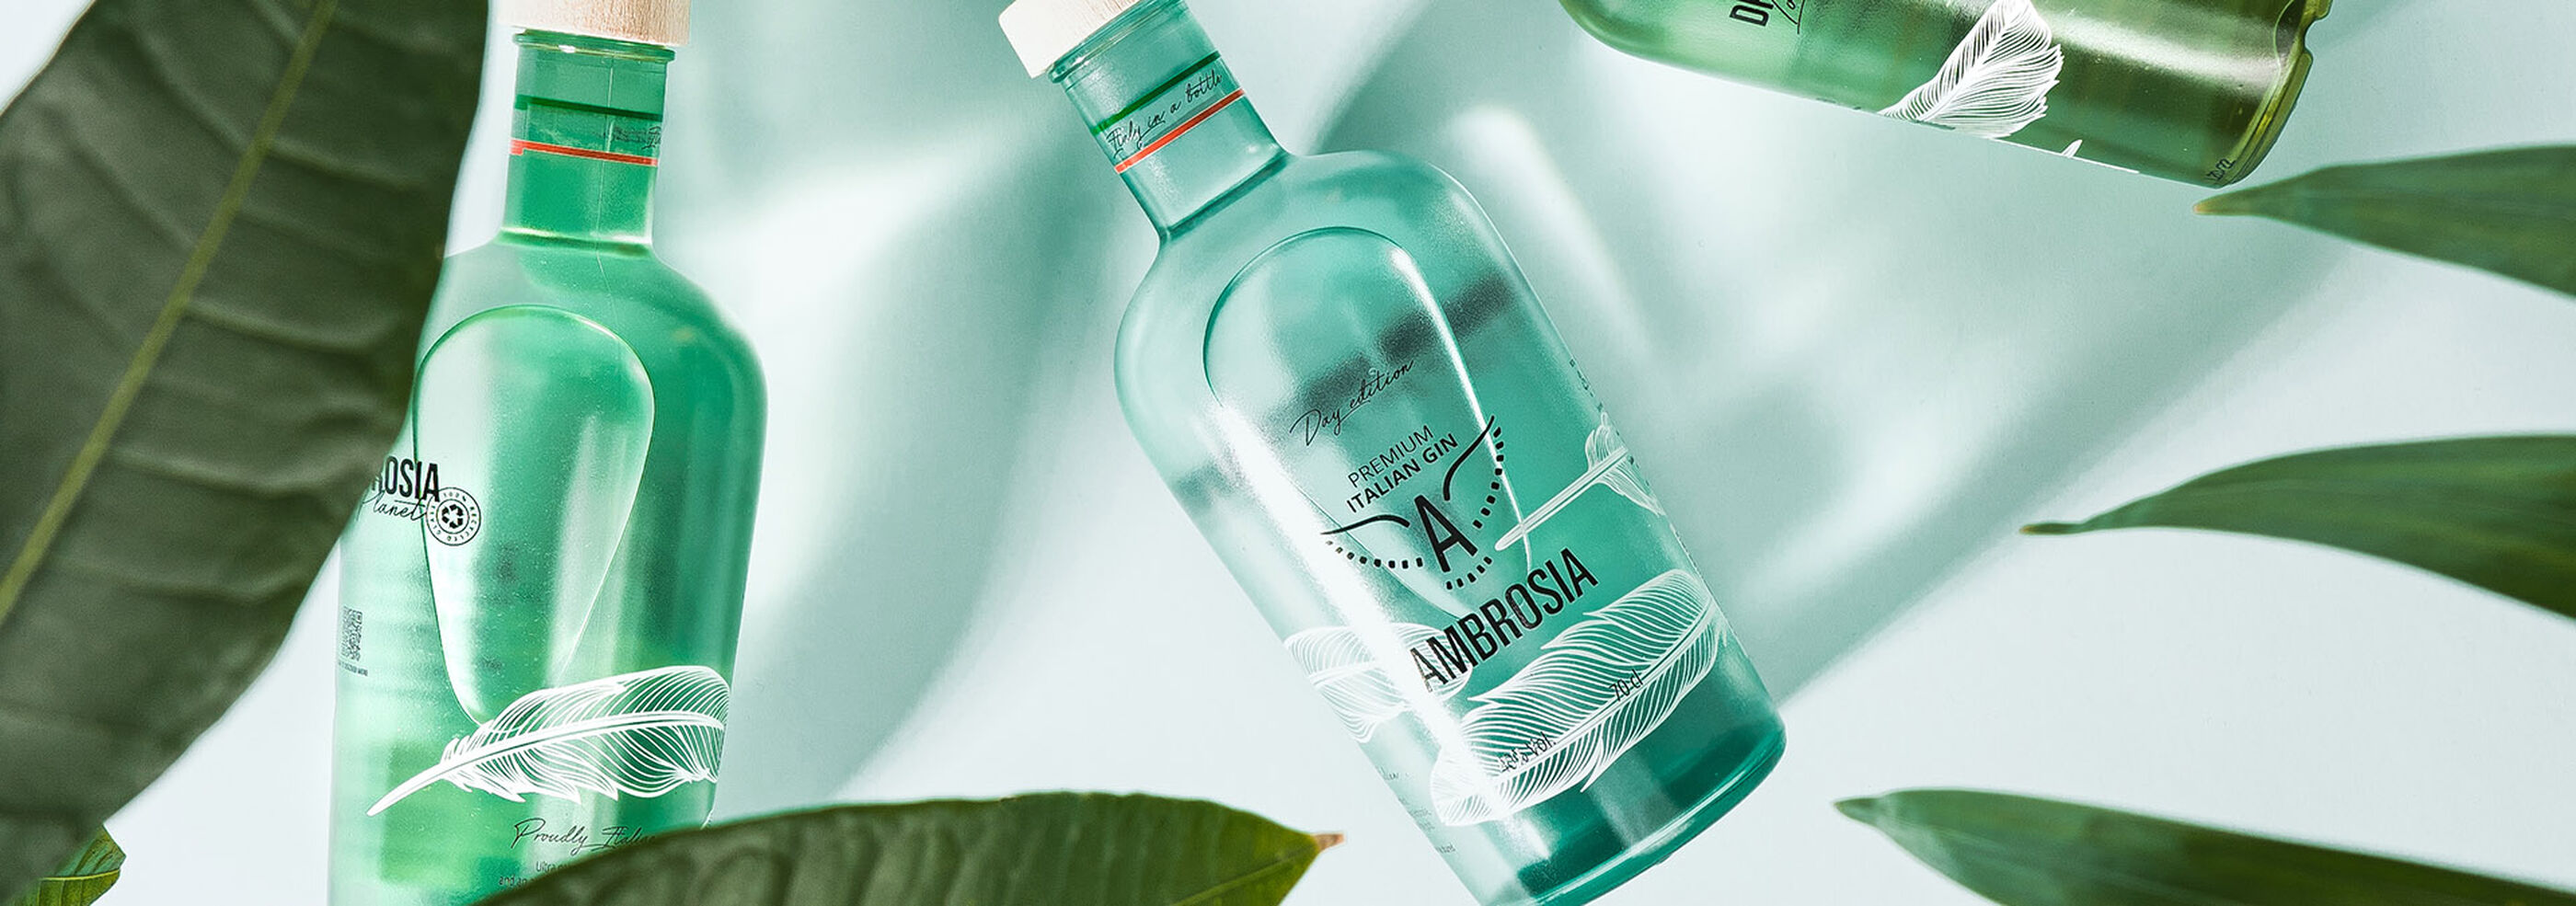 Ambrosia Gin bottles with palms and leaves